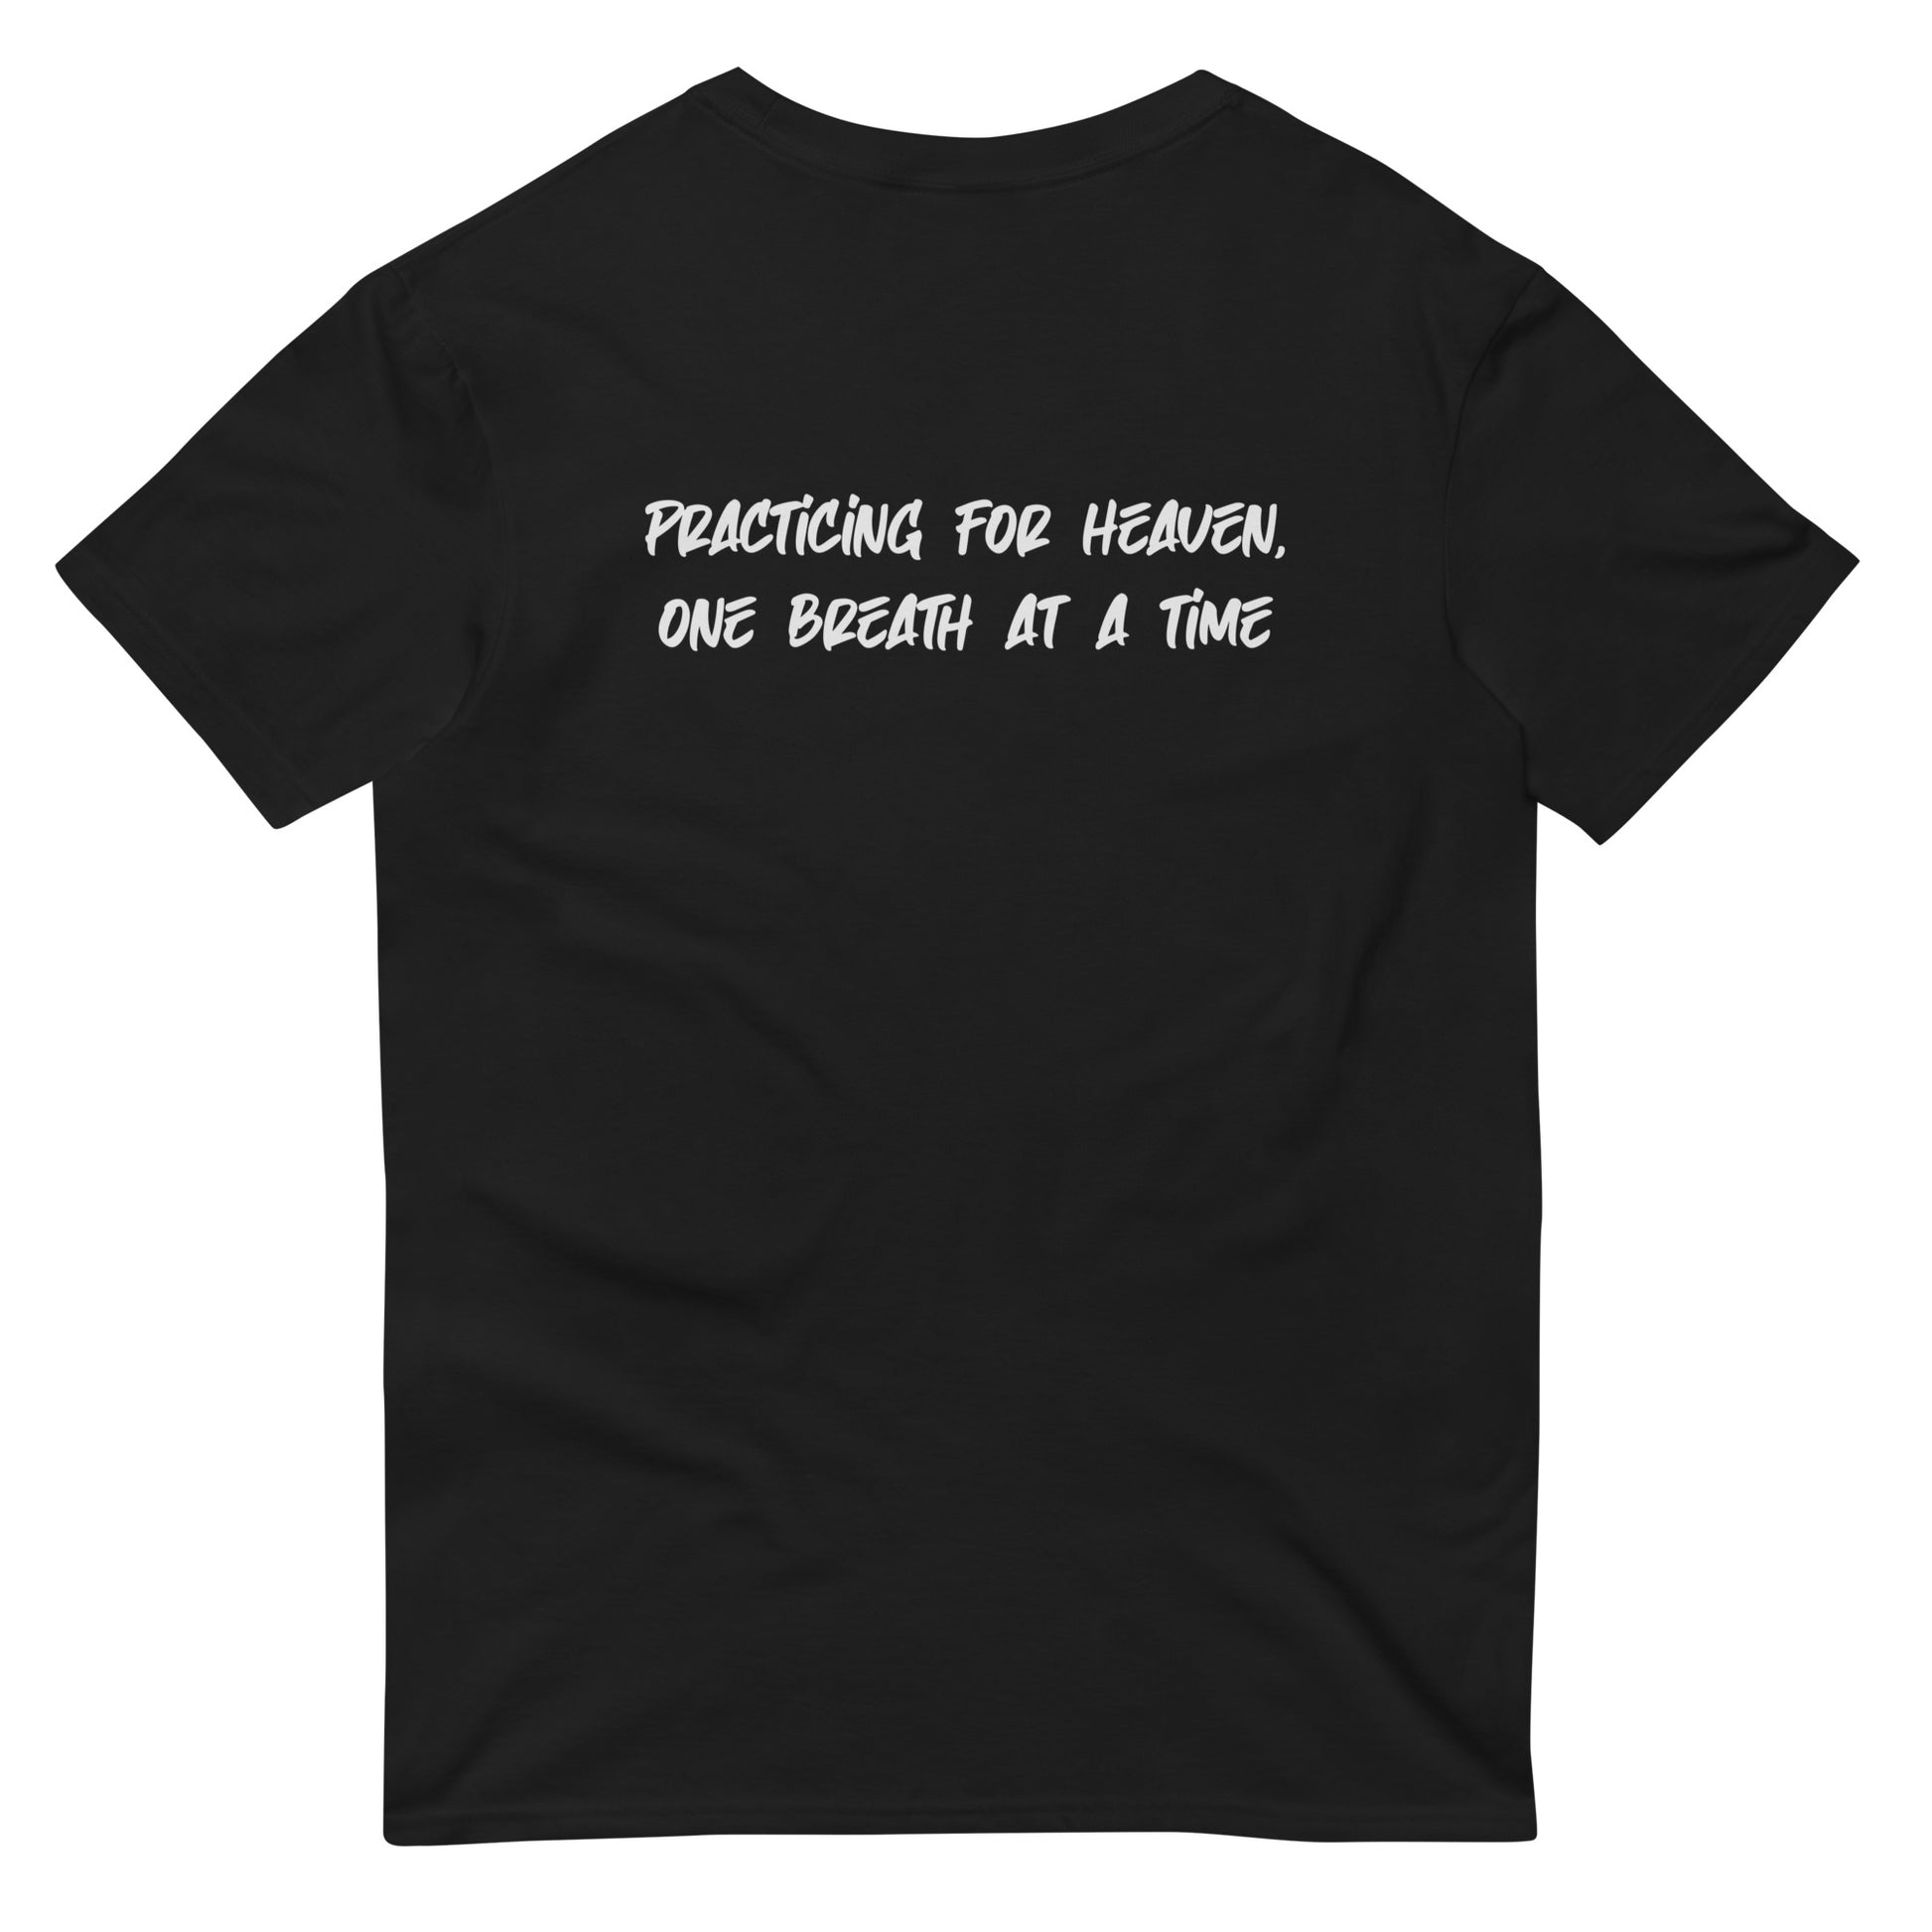 Tribe of Weirdos' 'Practicing For Heaven, One Breath At A Time' T-Shirt, a wearable reminder of life's journey towards tranquility.